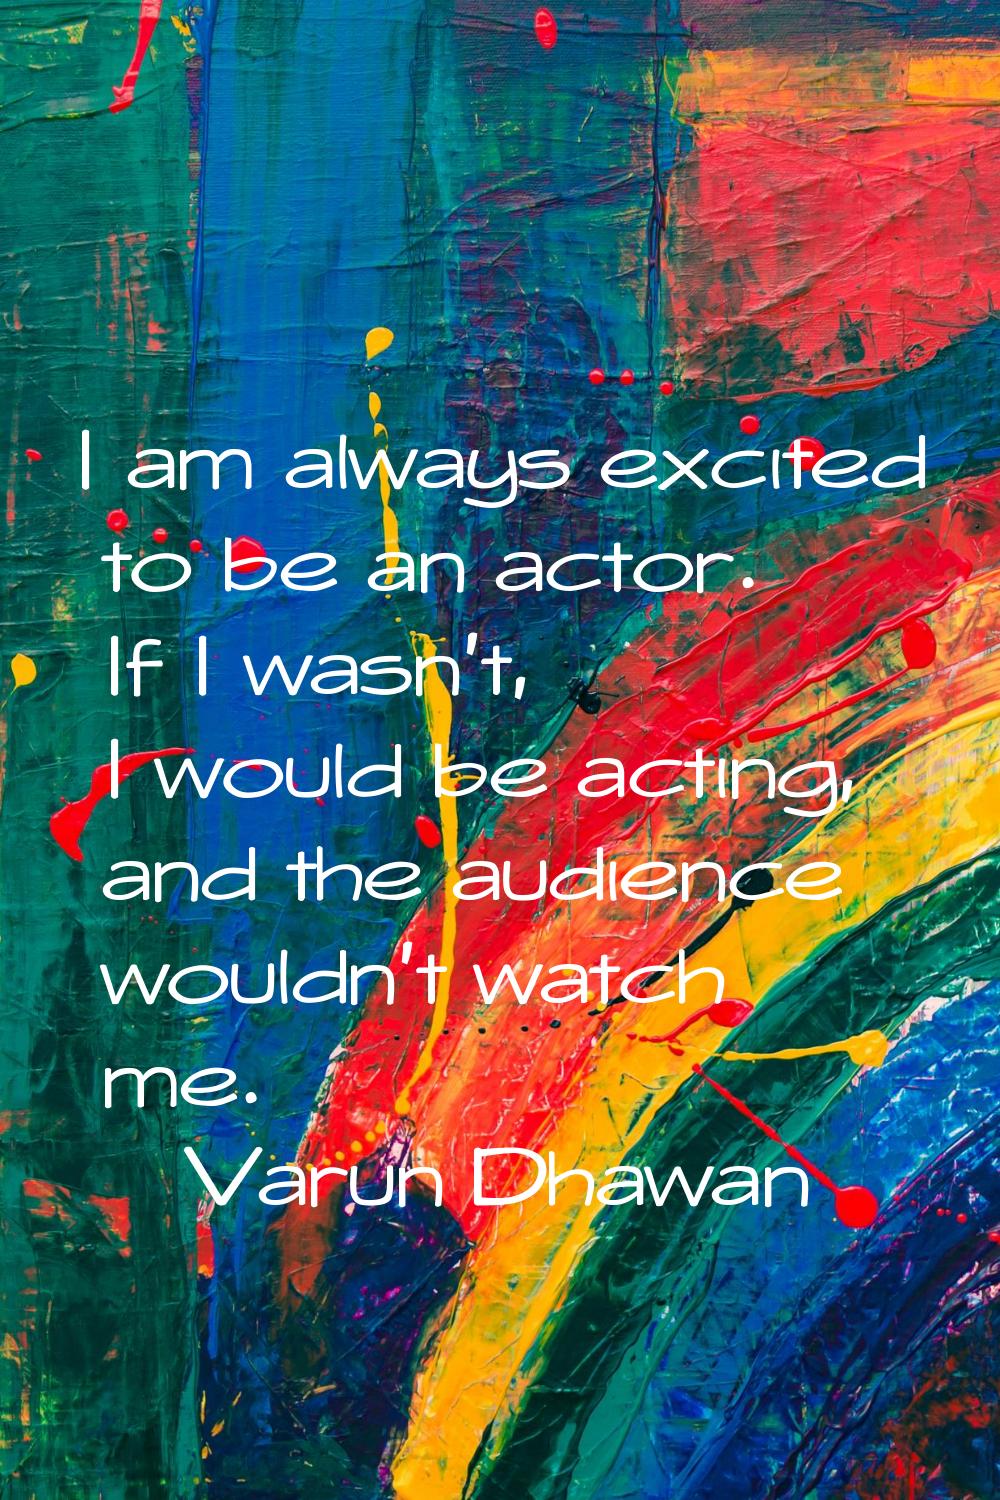 I am always excited to be an actor. If I wasn't, I would be acting, and the audience wouldn't watch